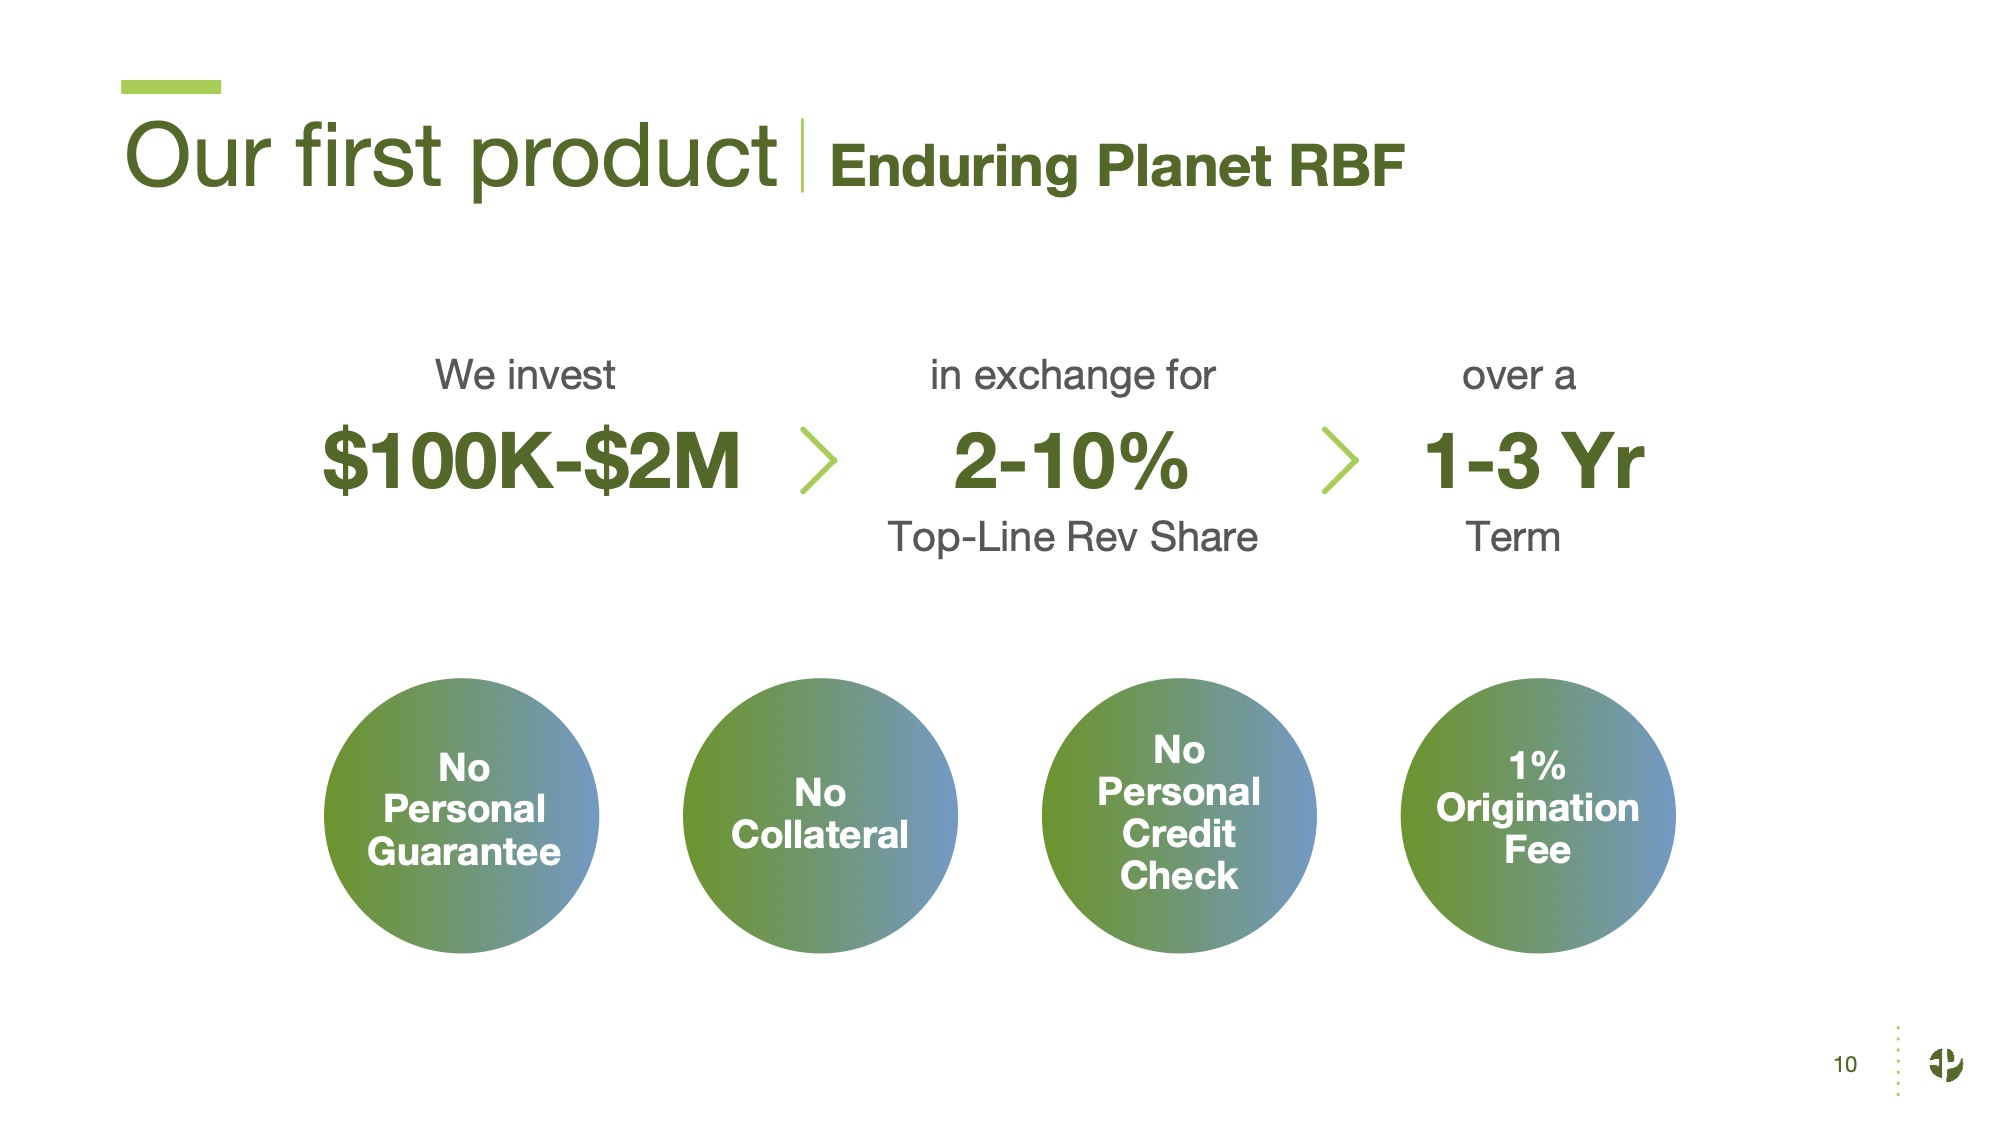 We invest in exchange for $100K-$2M 2-10% Top-Line Rev Share over a 1-3 Yr Term